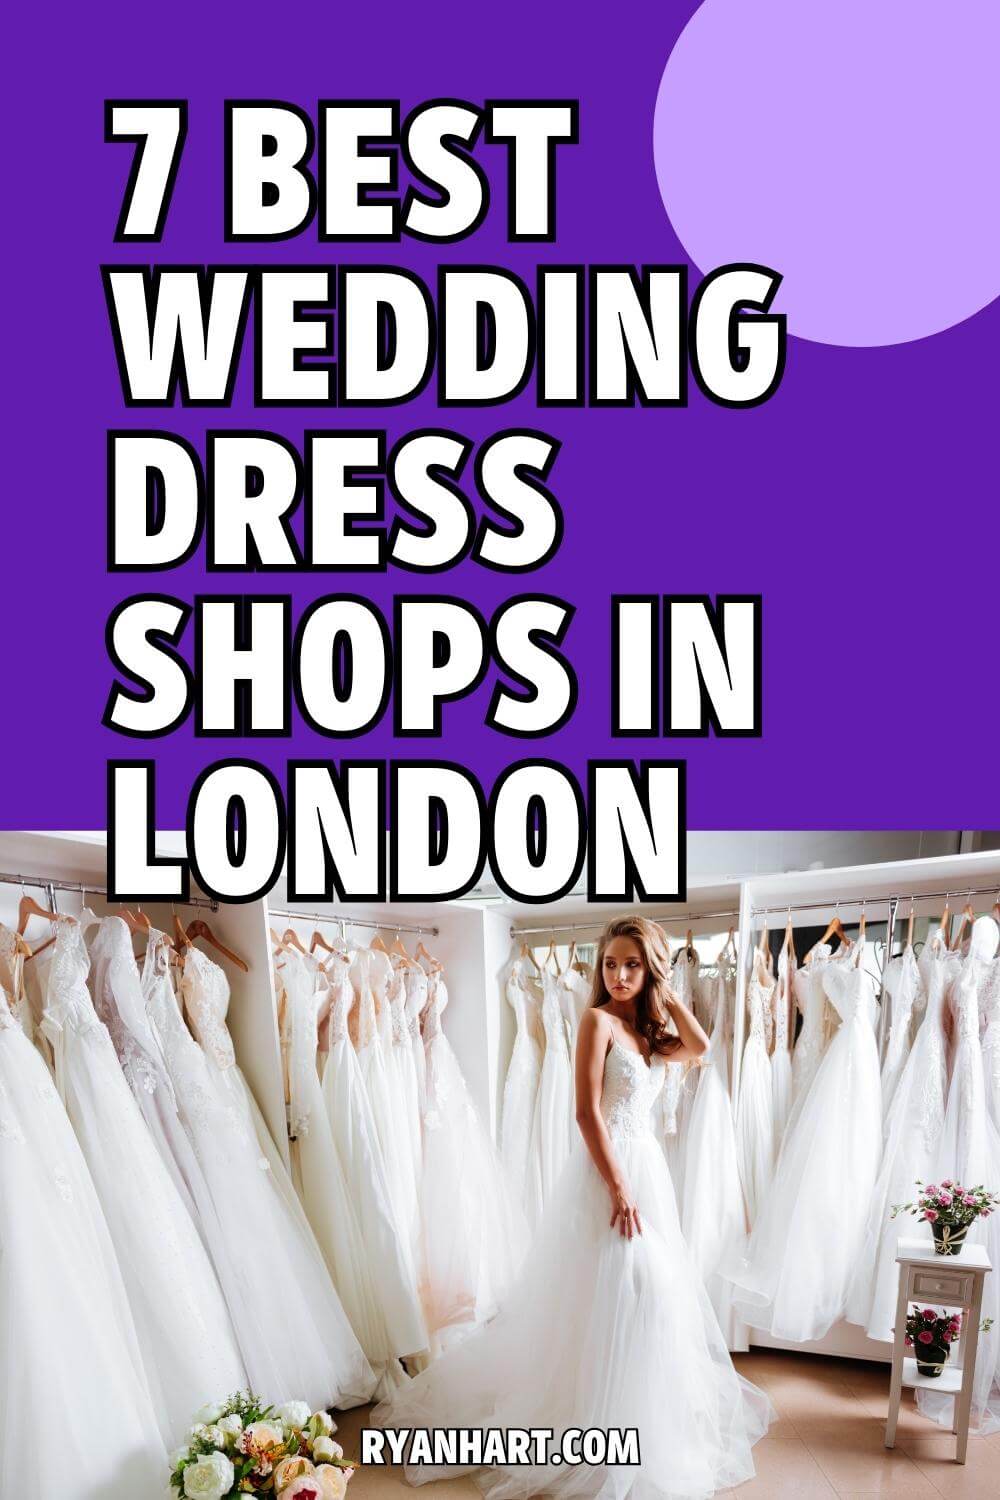 Woman in wedding dress boutique